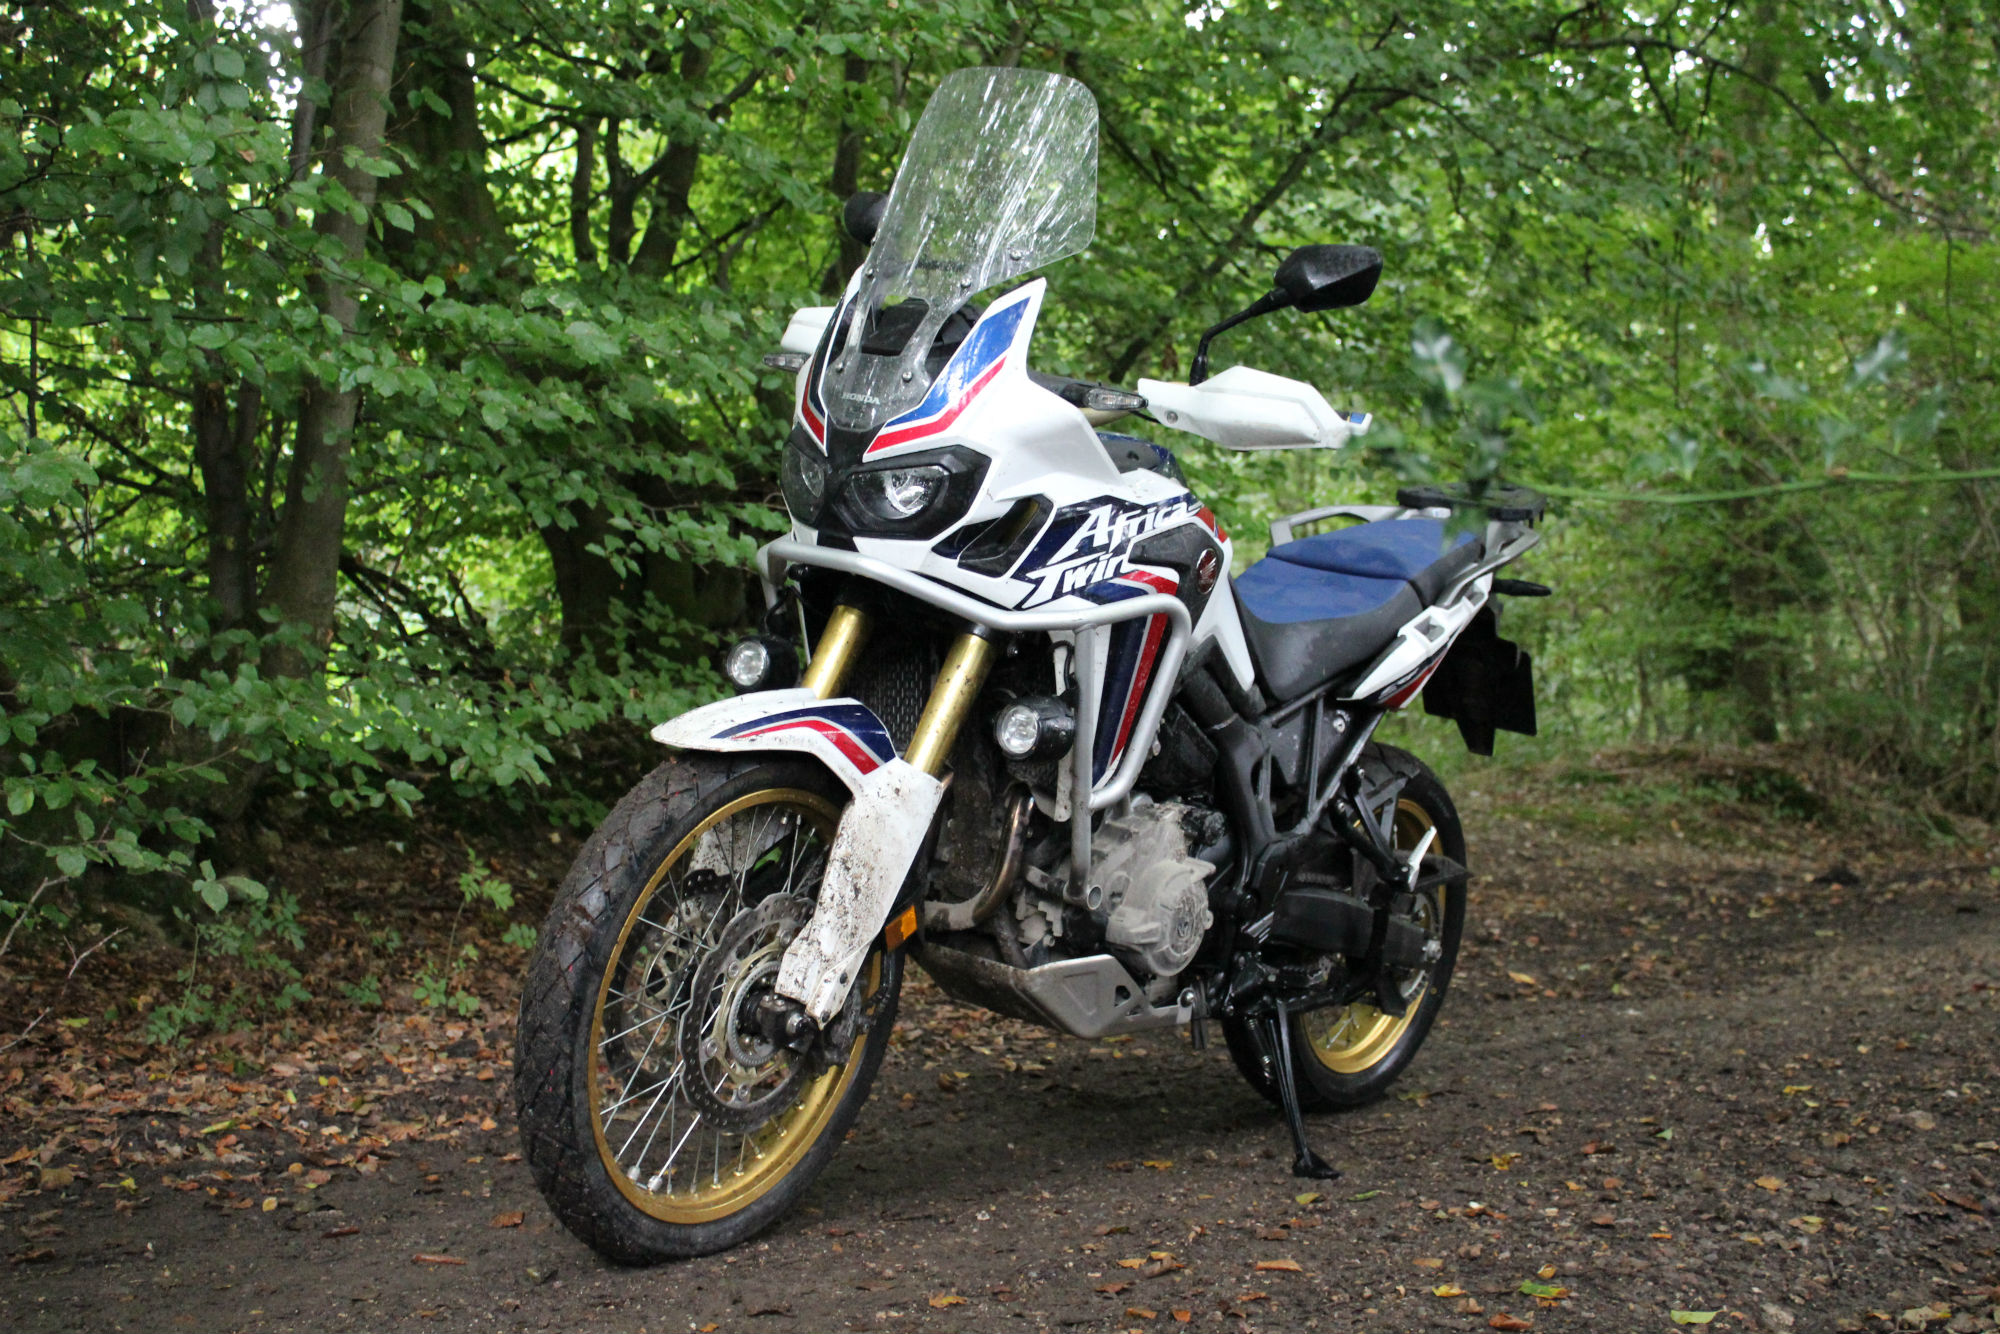 Back-to-back test: BMW R1200GS Adventure vs Honda Africa Twin review